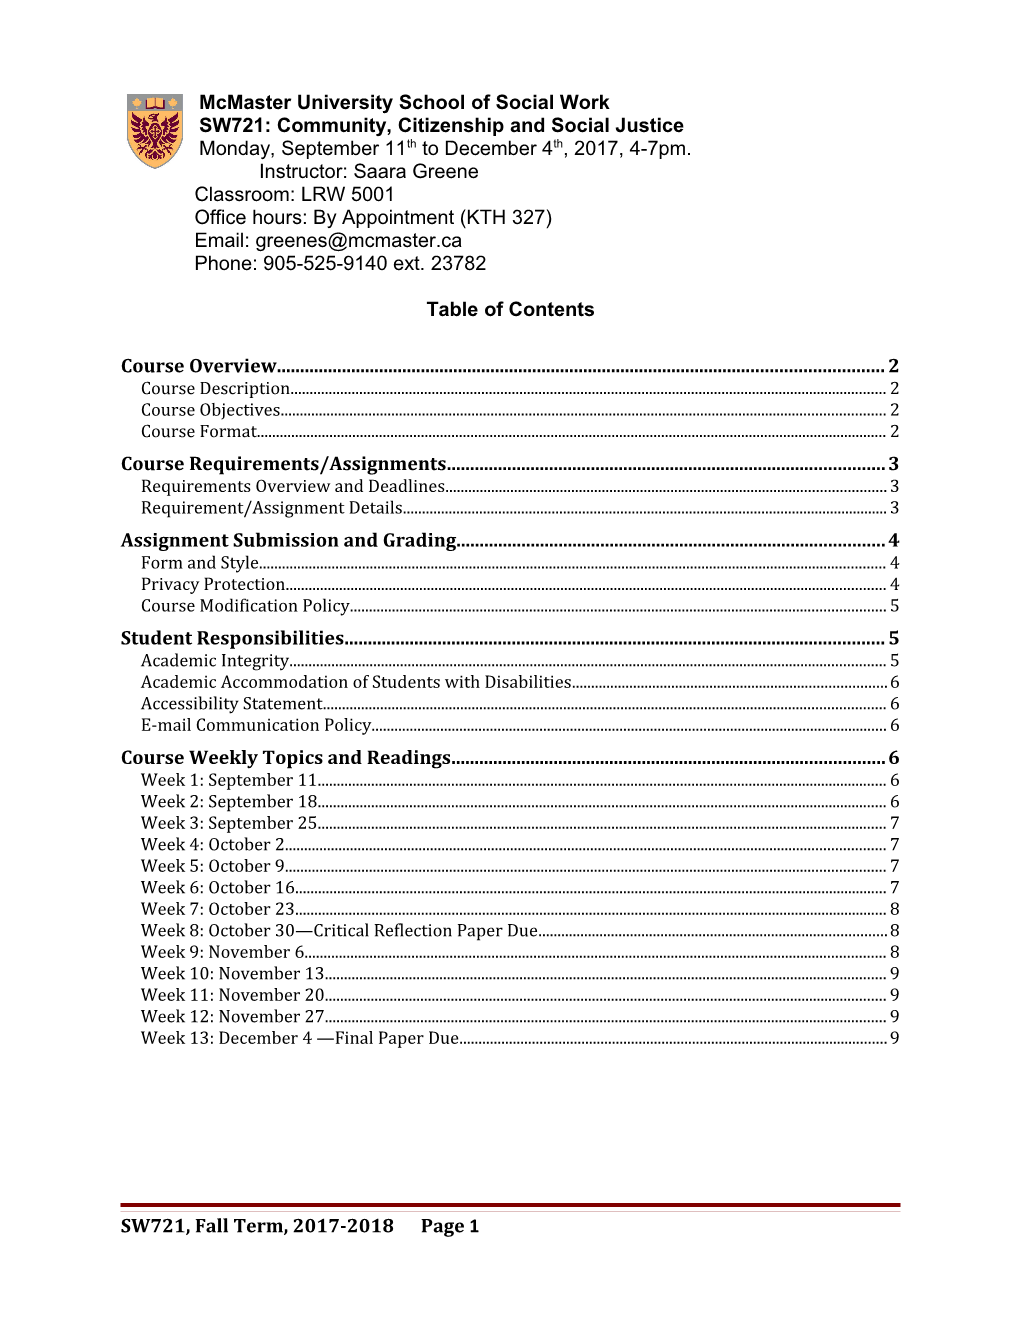 Accessible Course Outline Template